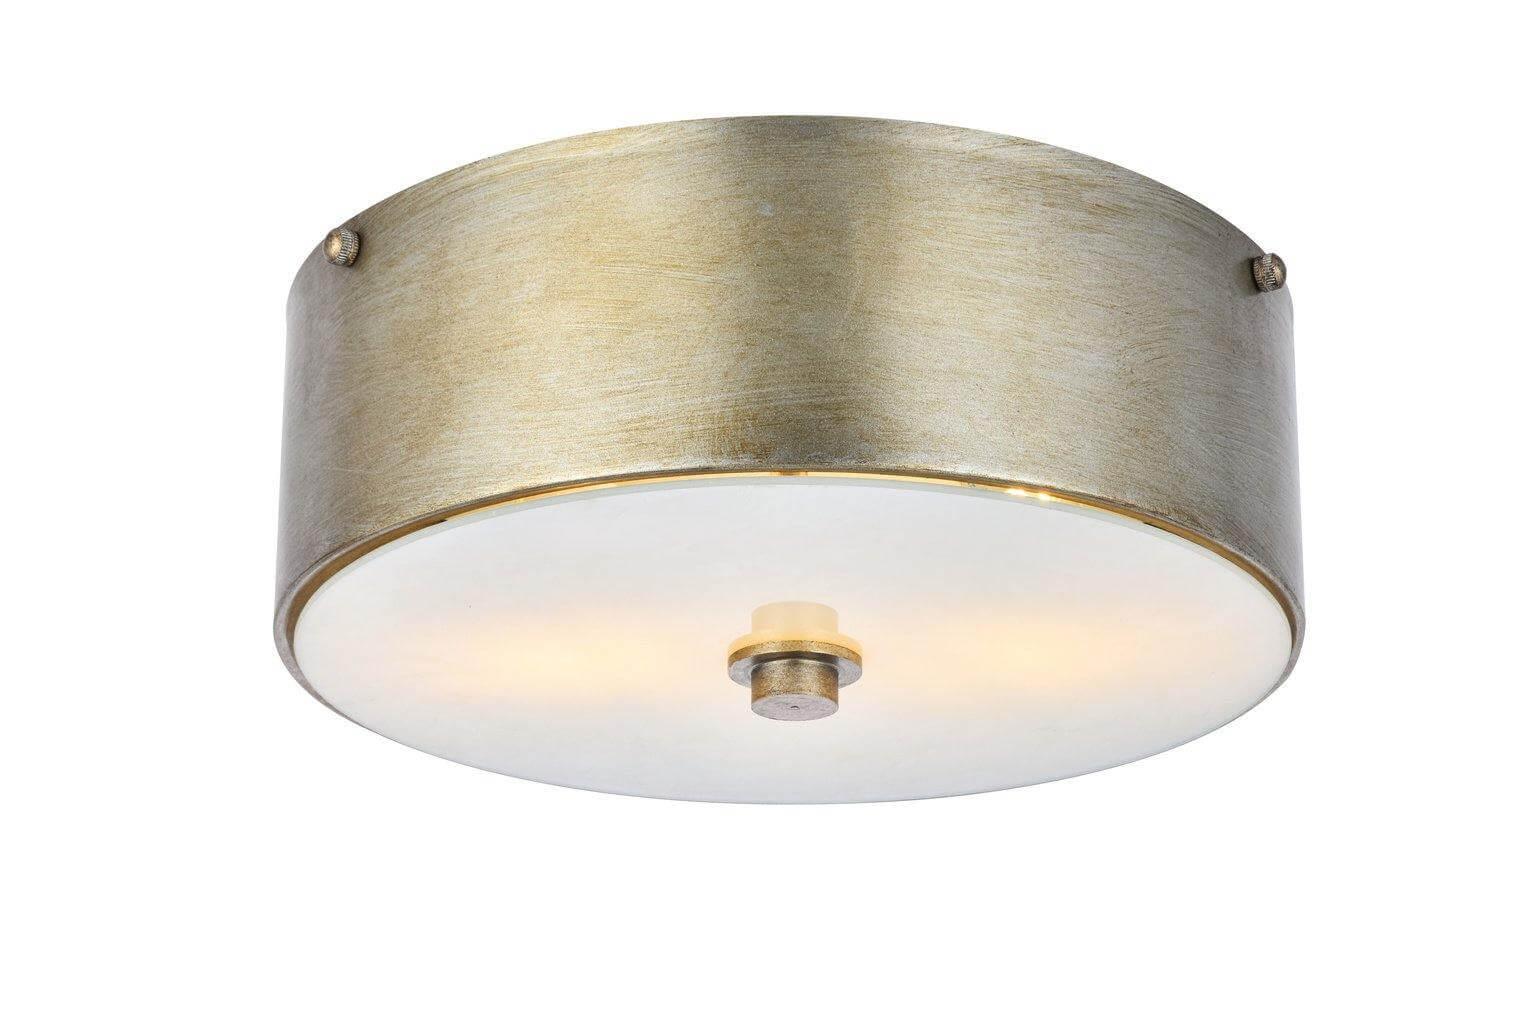 Lights of Tuscany 15904-4 European French Country Semi Flush